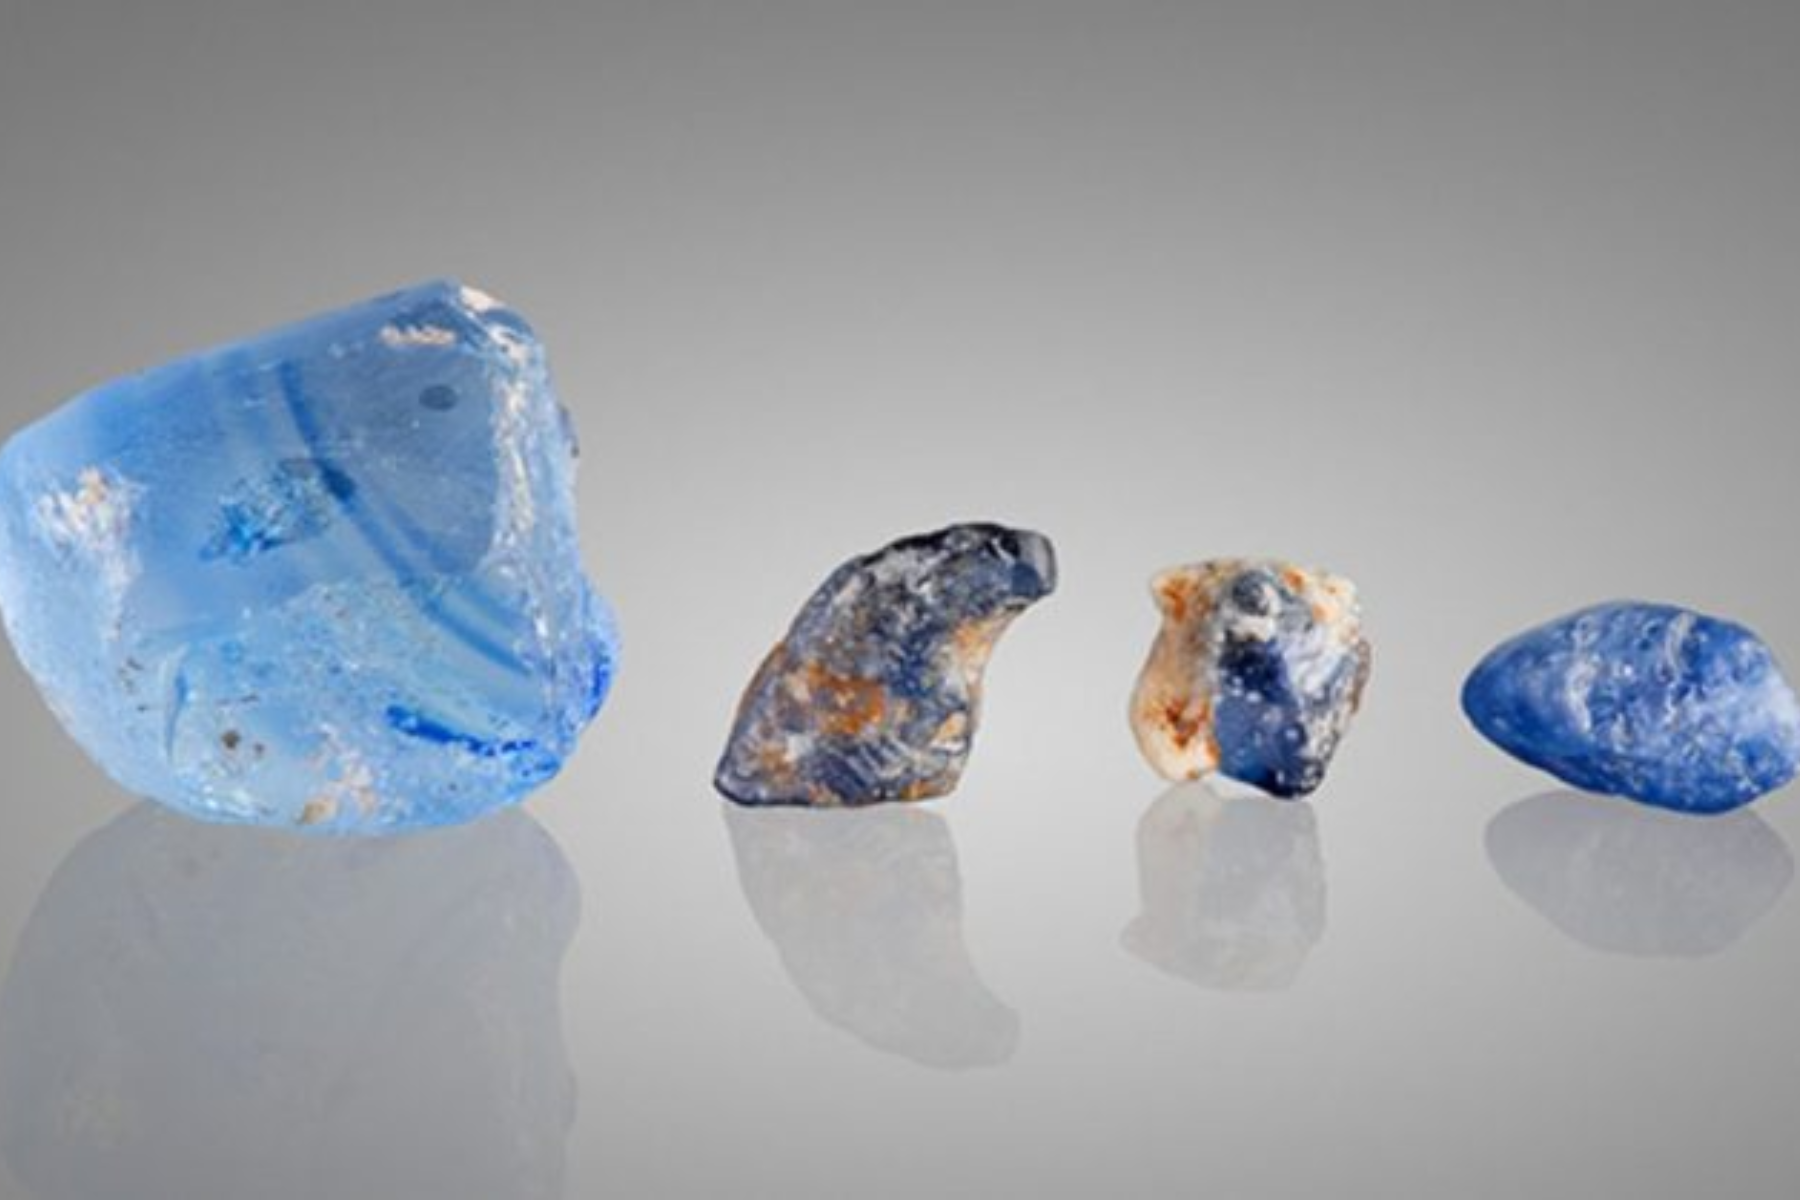 This set includes a 48.63 ct piece of manmade glass (left), 9.17 and 6.21 ct laboratory-grown sapphires with resin matrix imitation on the surface (center), and an 8.46 ct natural blue sapphire rough (right) (right)